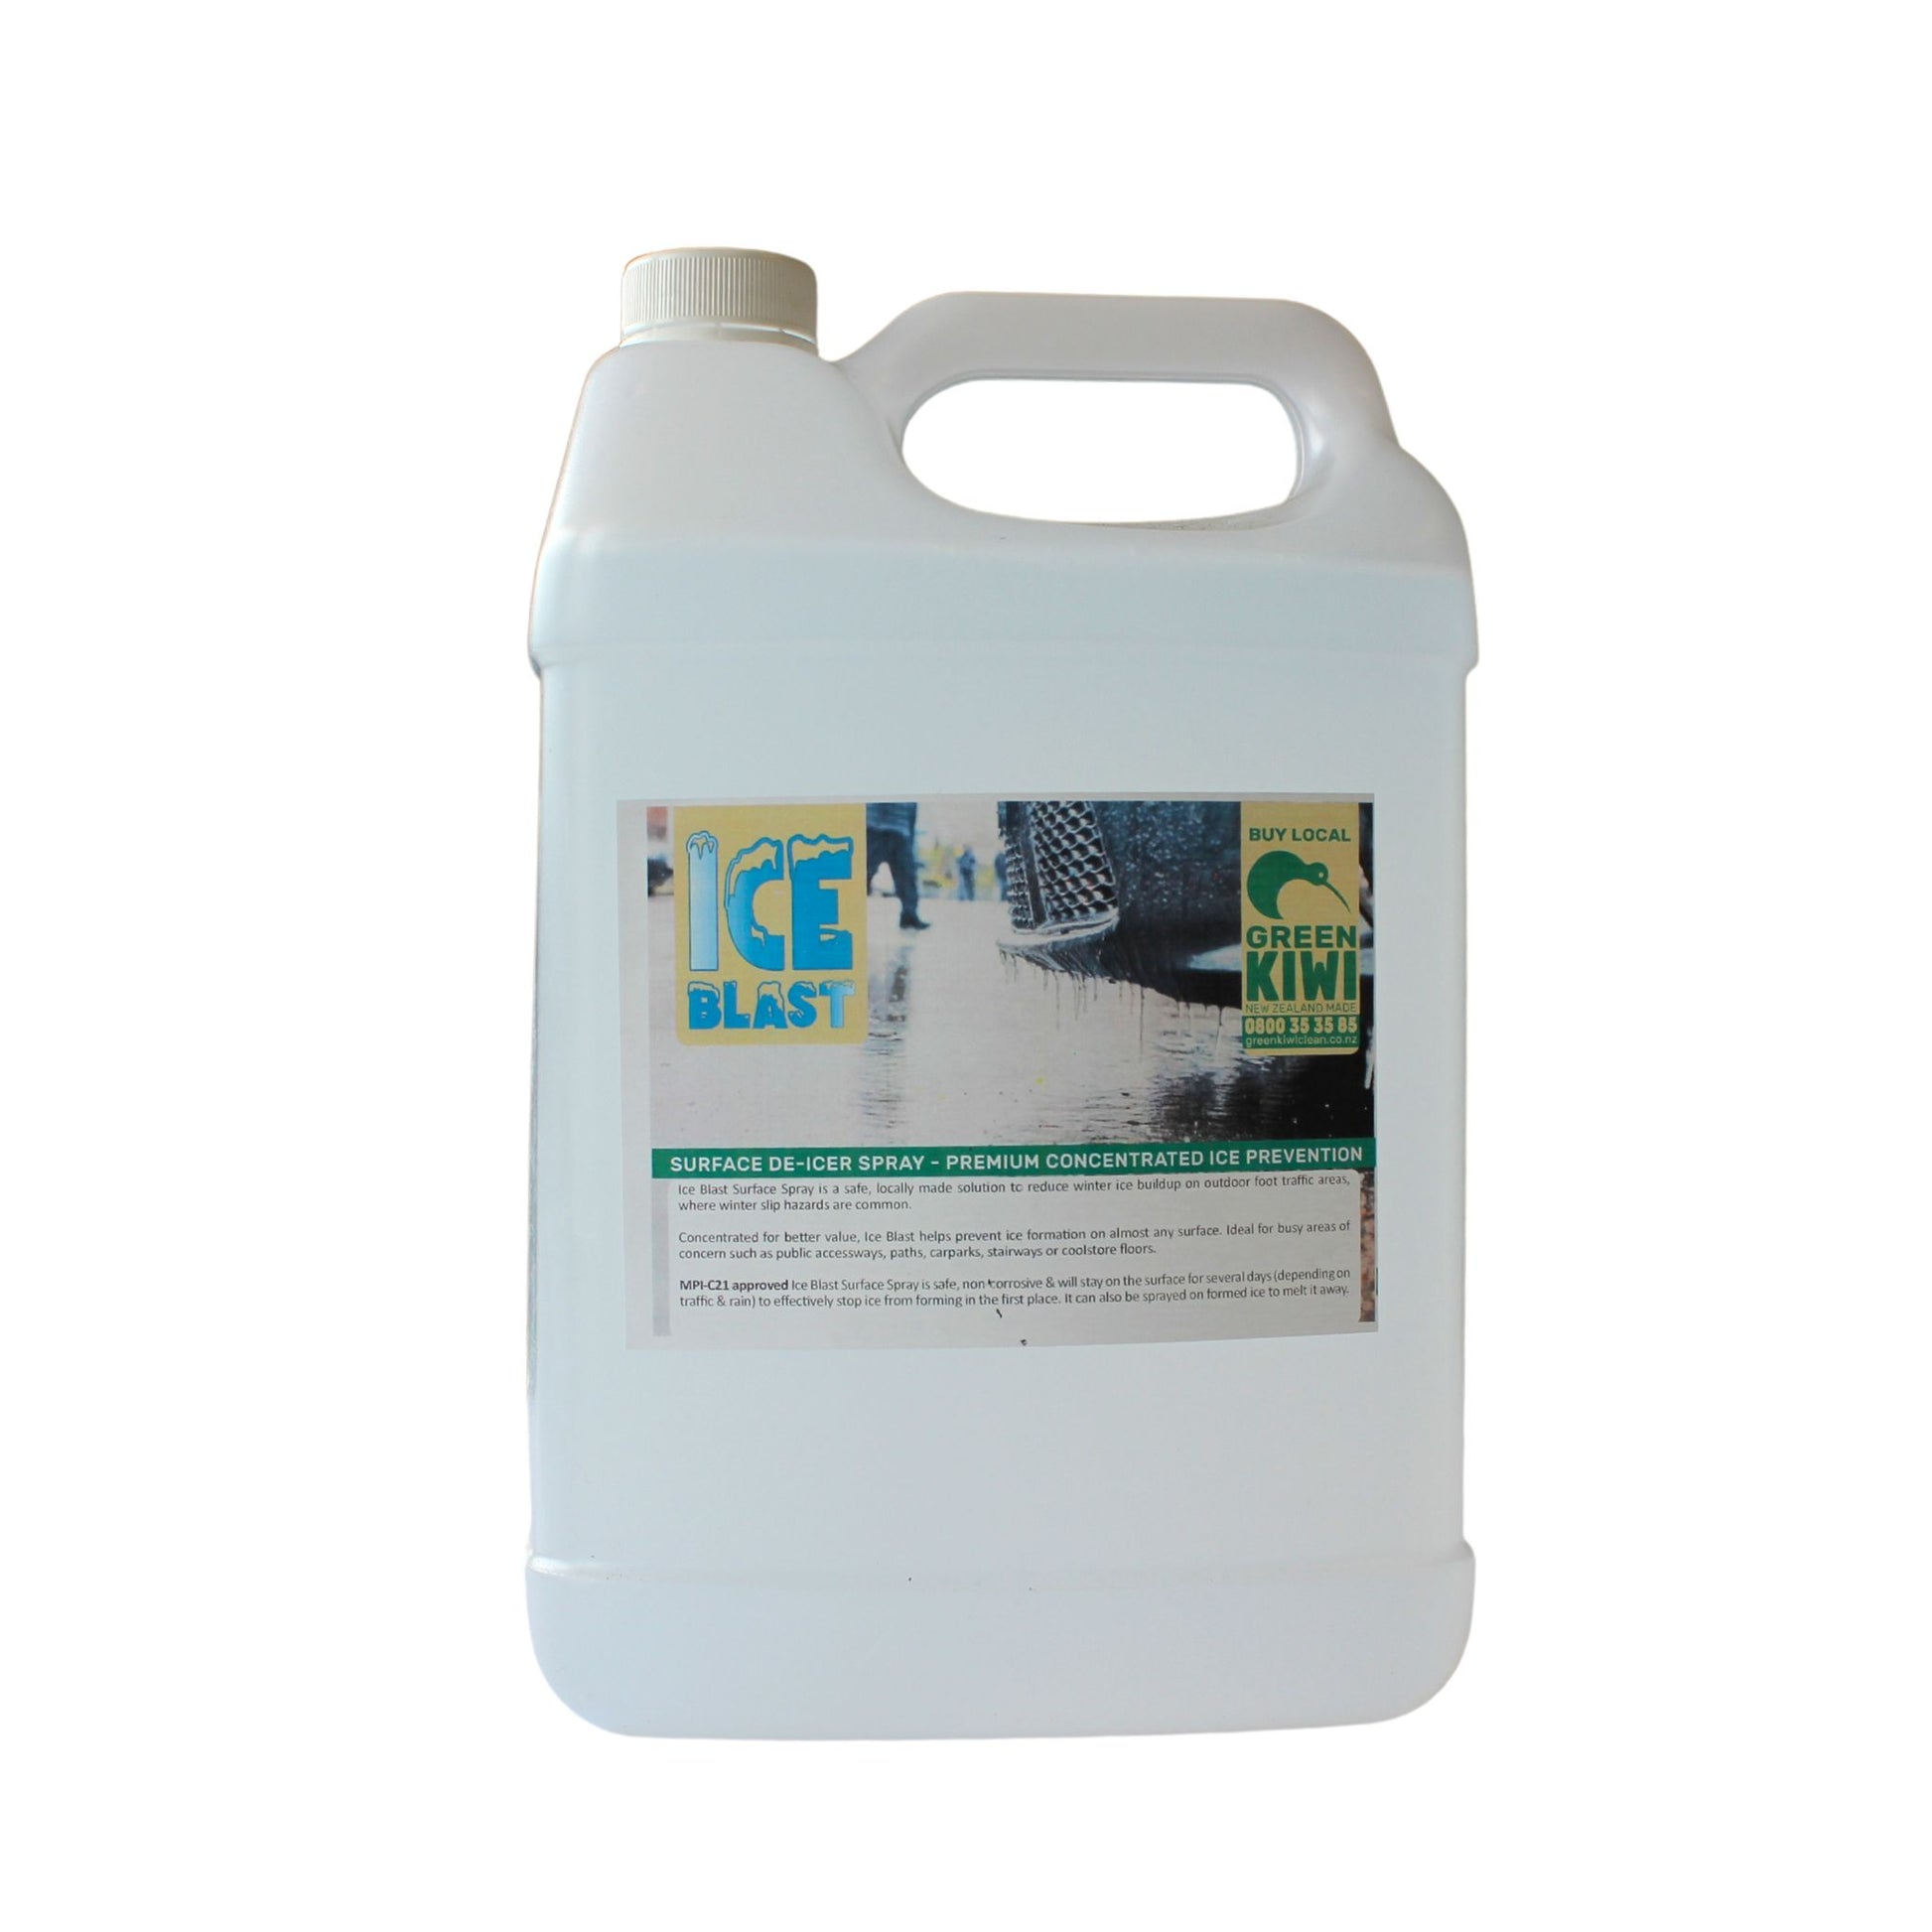      5L Ice Blast Concentrated Surface Spray for De-Icing outdoor areas  Ice Blast Concentrated De-Icing Surface Spray